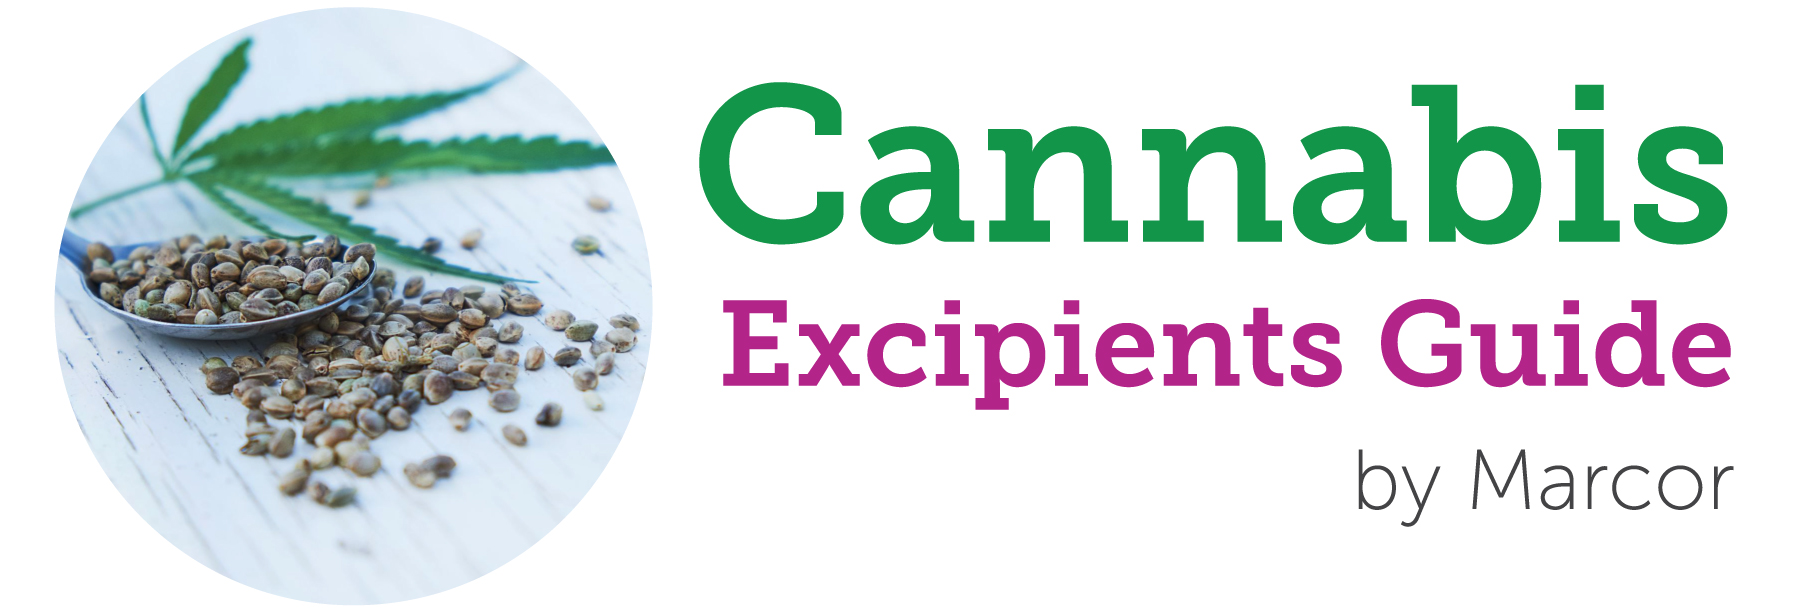 Cannabis Excipients Guide by Marcor